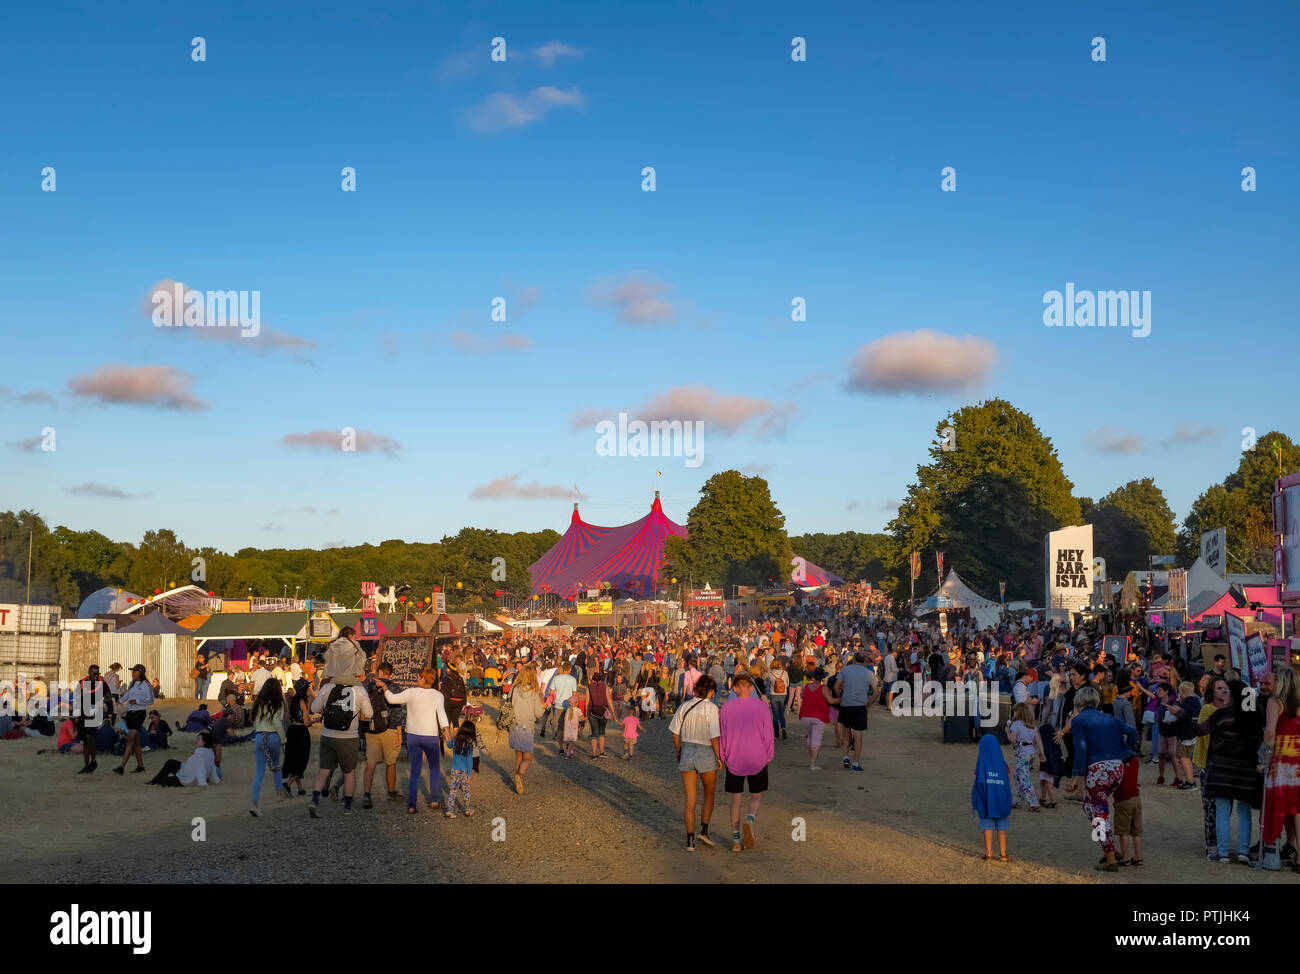 Eventing is drawing in at the Latitude festival in Henham Park. Stock Photo